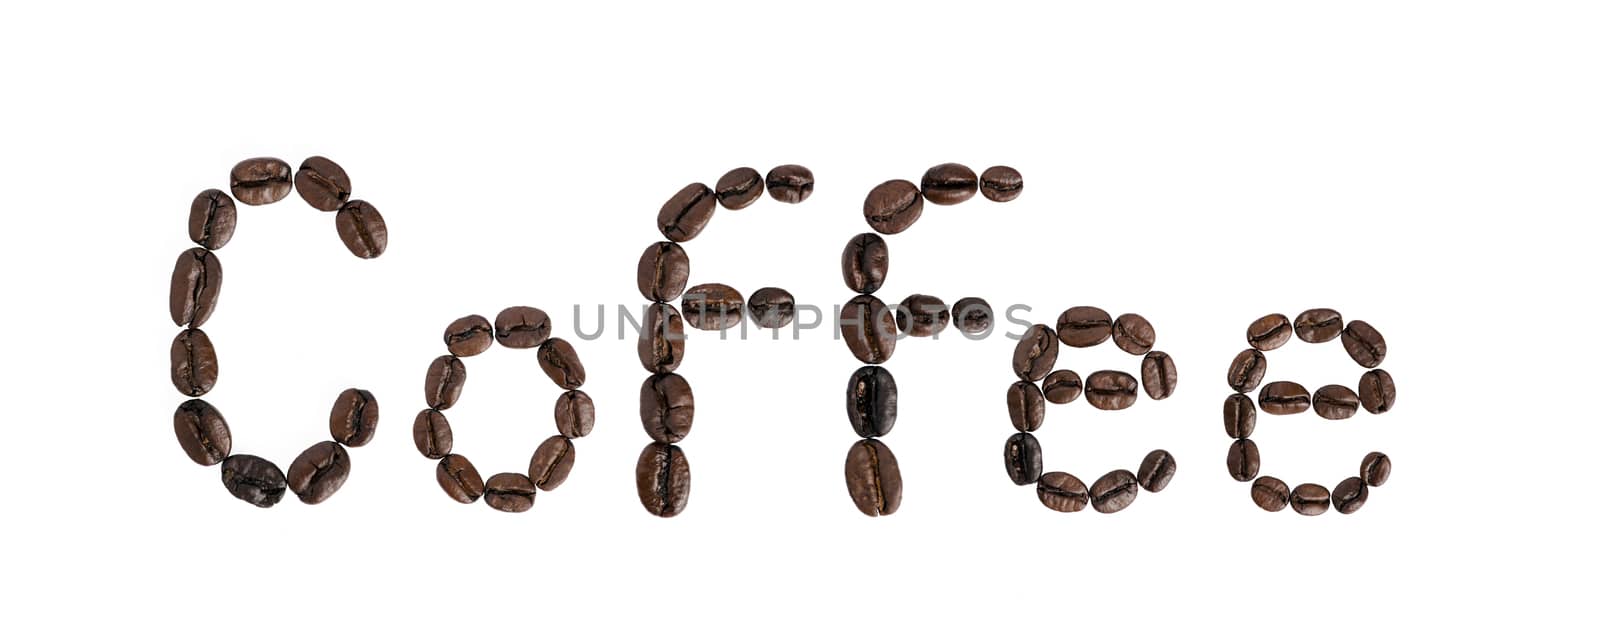 Word coffee made of coffee beans by richpav